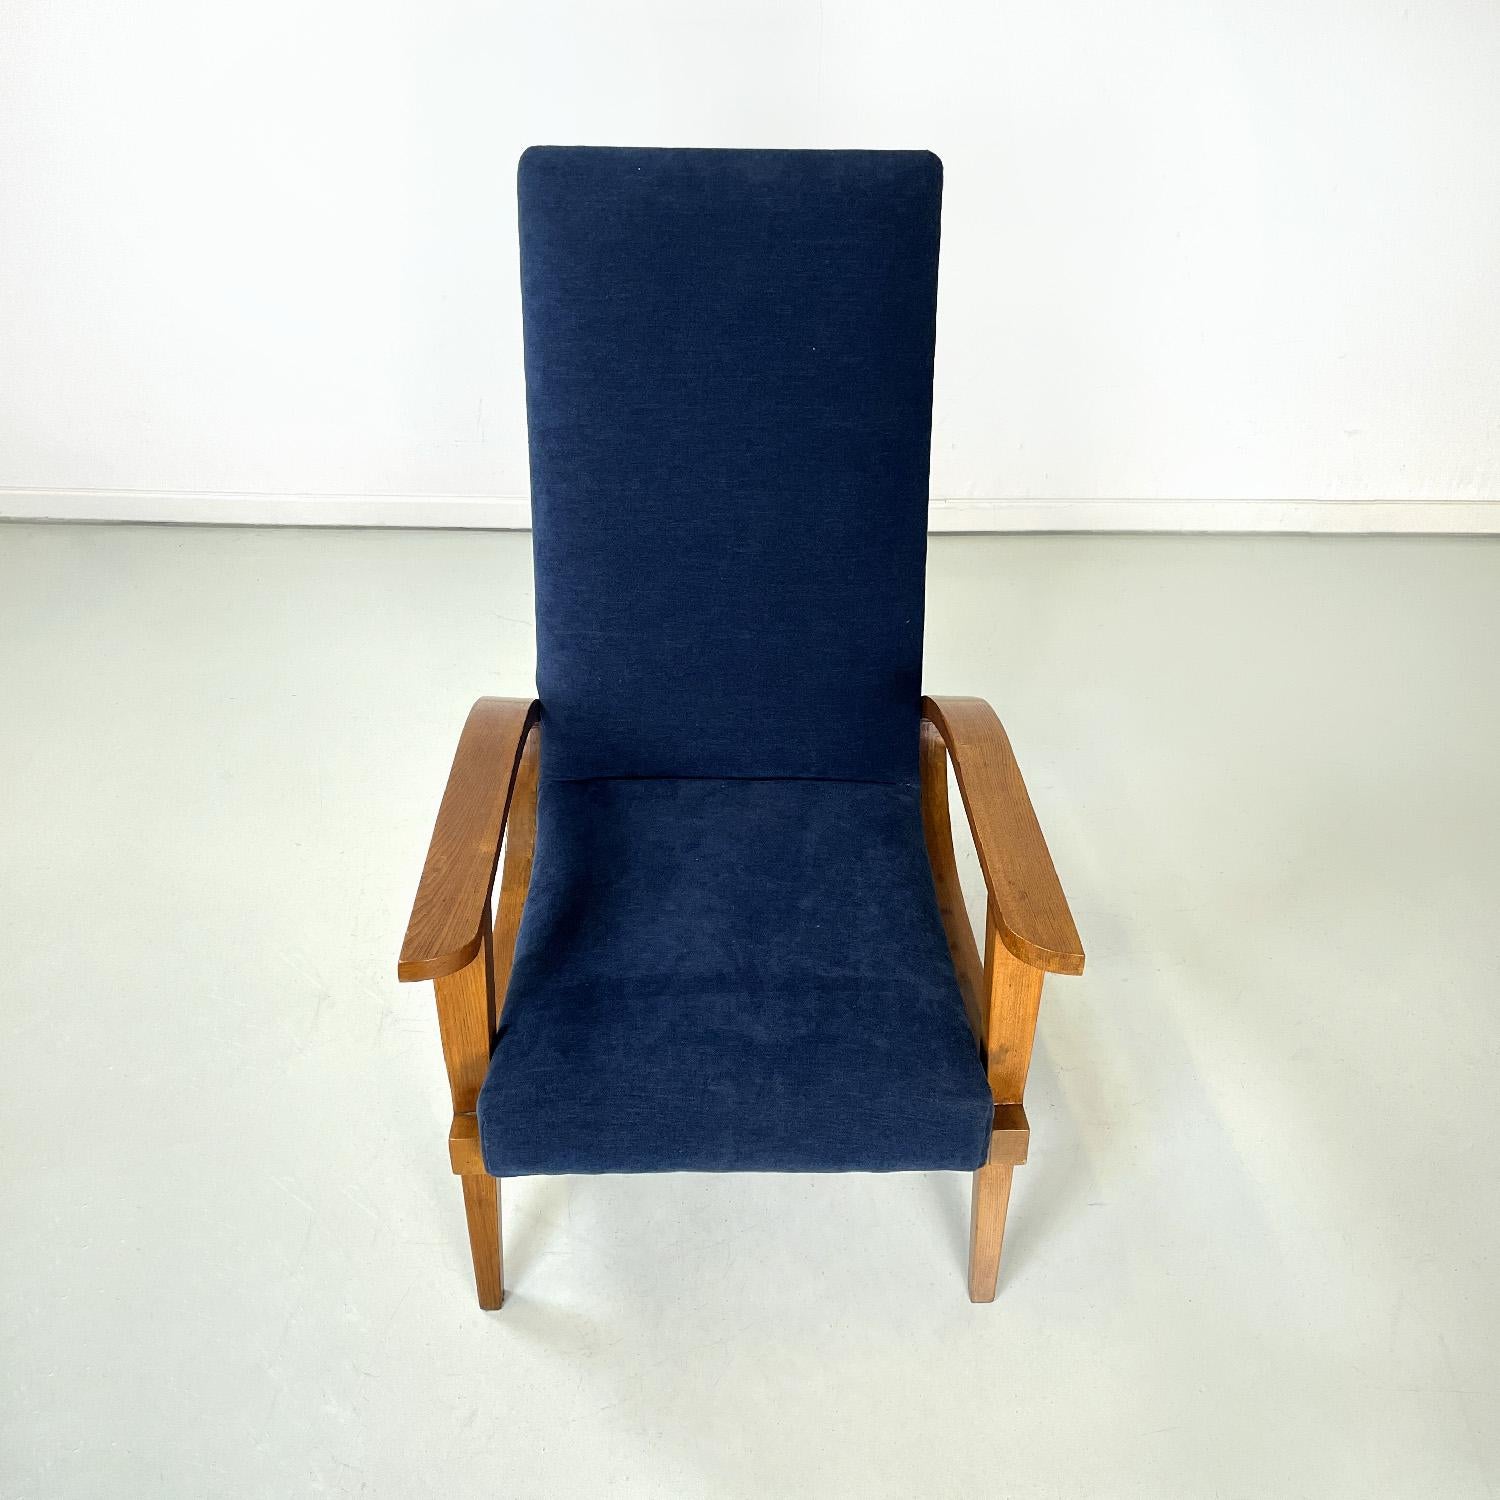 Fabric Italian mid-century modern wood and blue fabric armchairs, 1950s For Sale